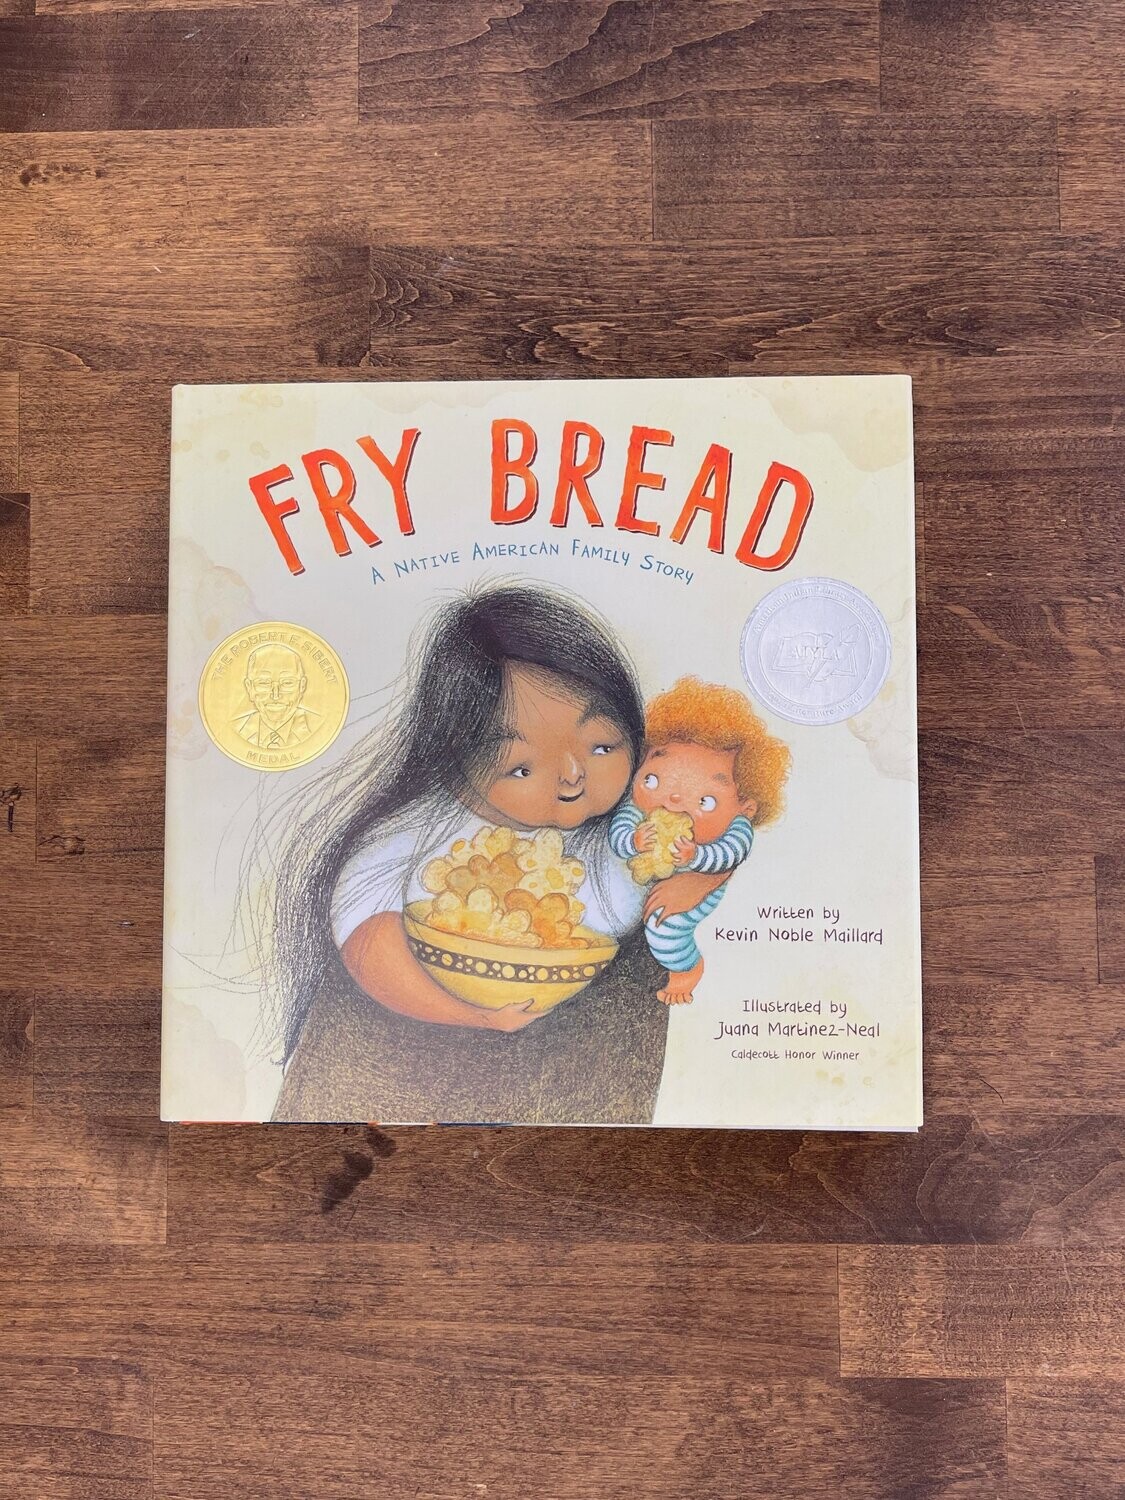 fry-bread-book-a-native-american-family-story